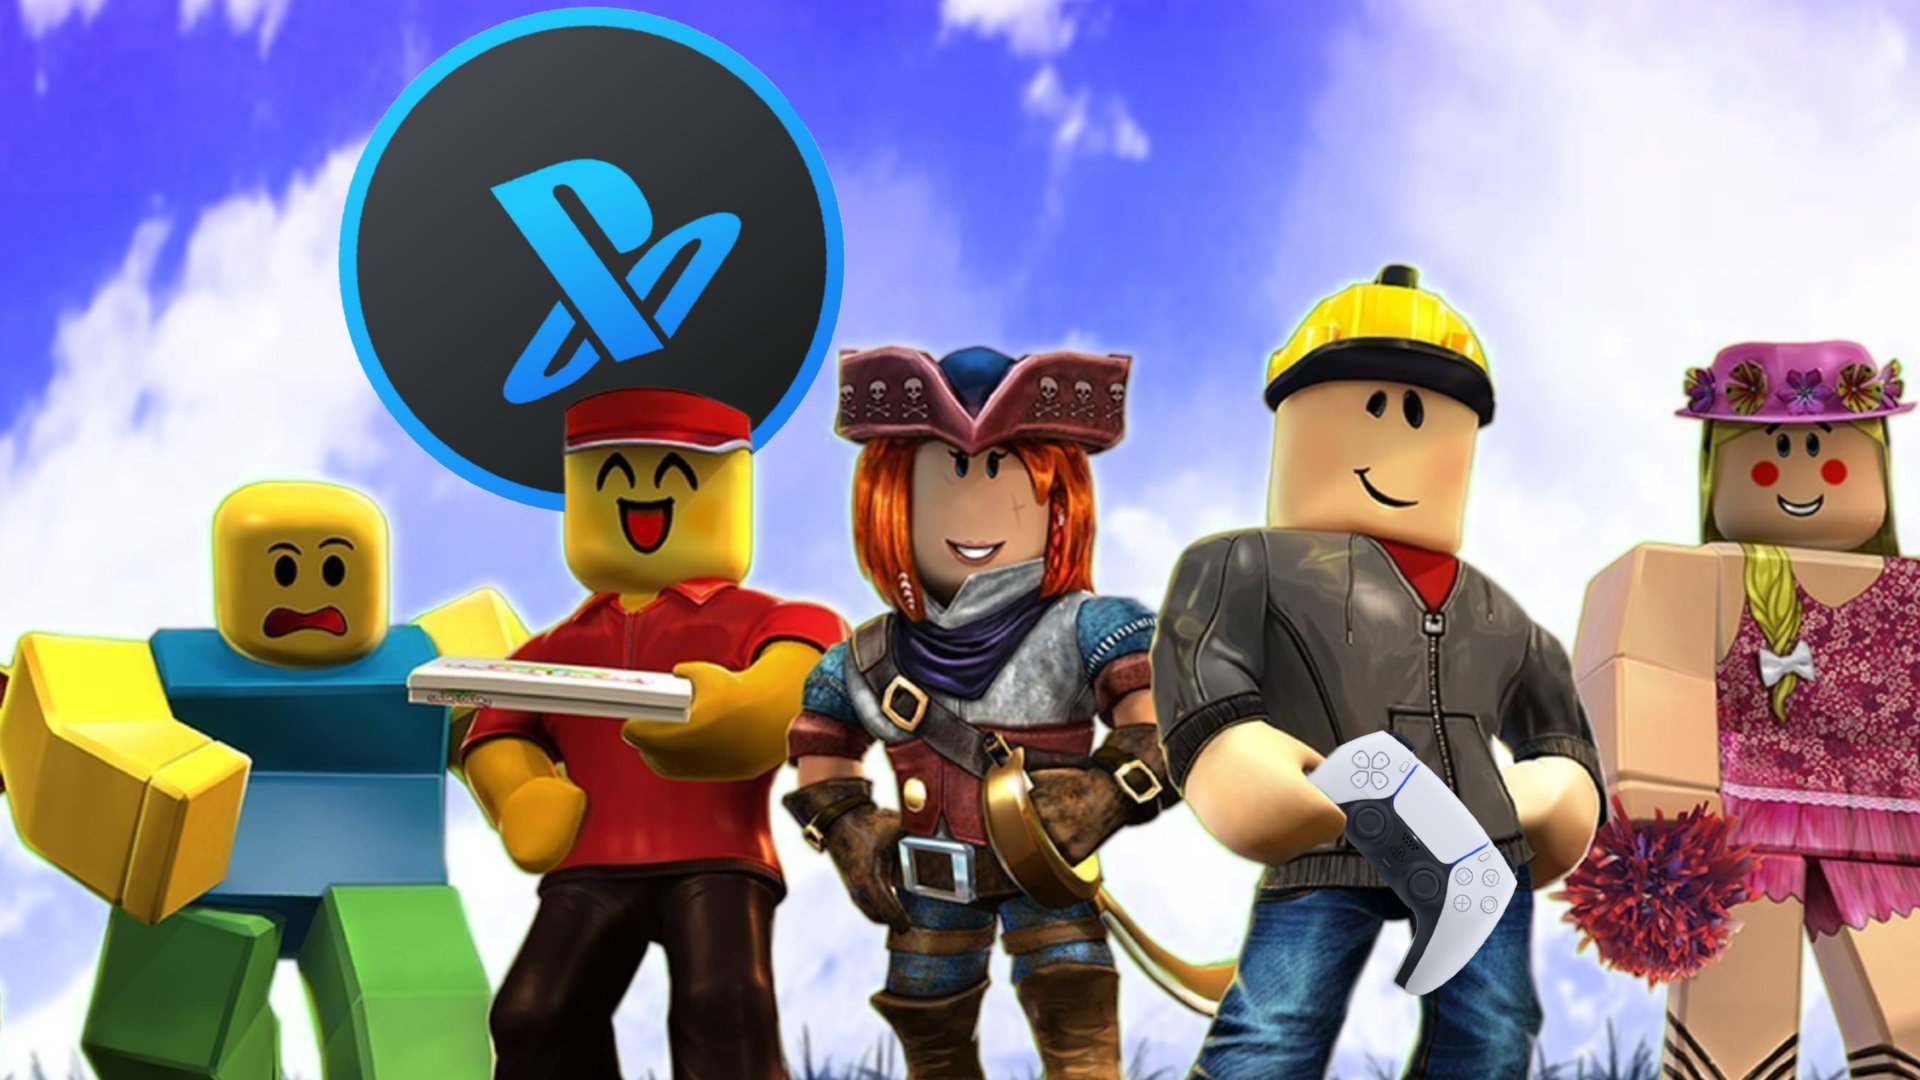 Best Roblox Games on PS5 and PS4